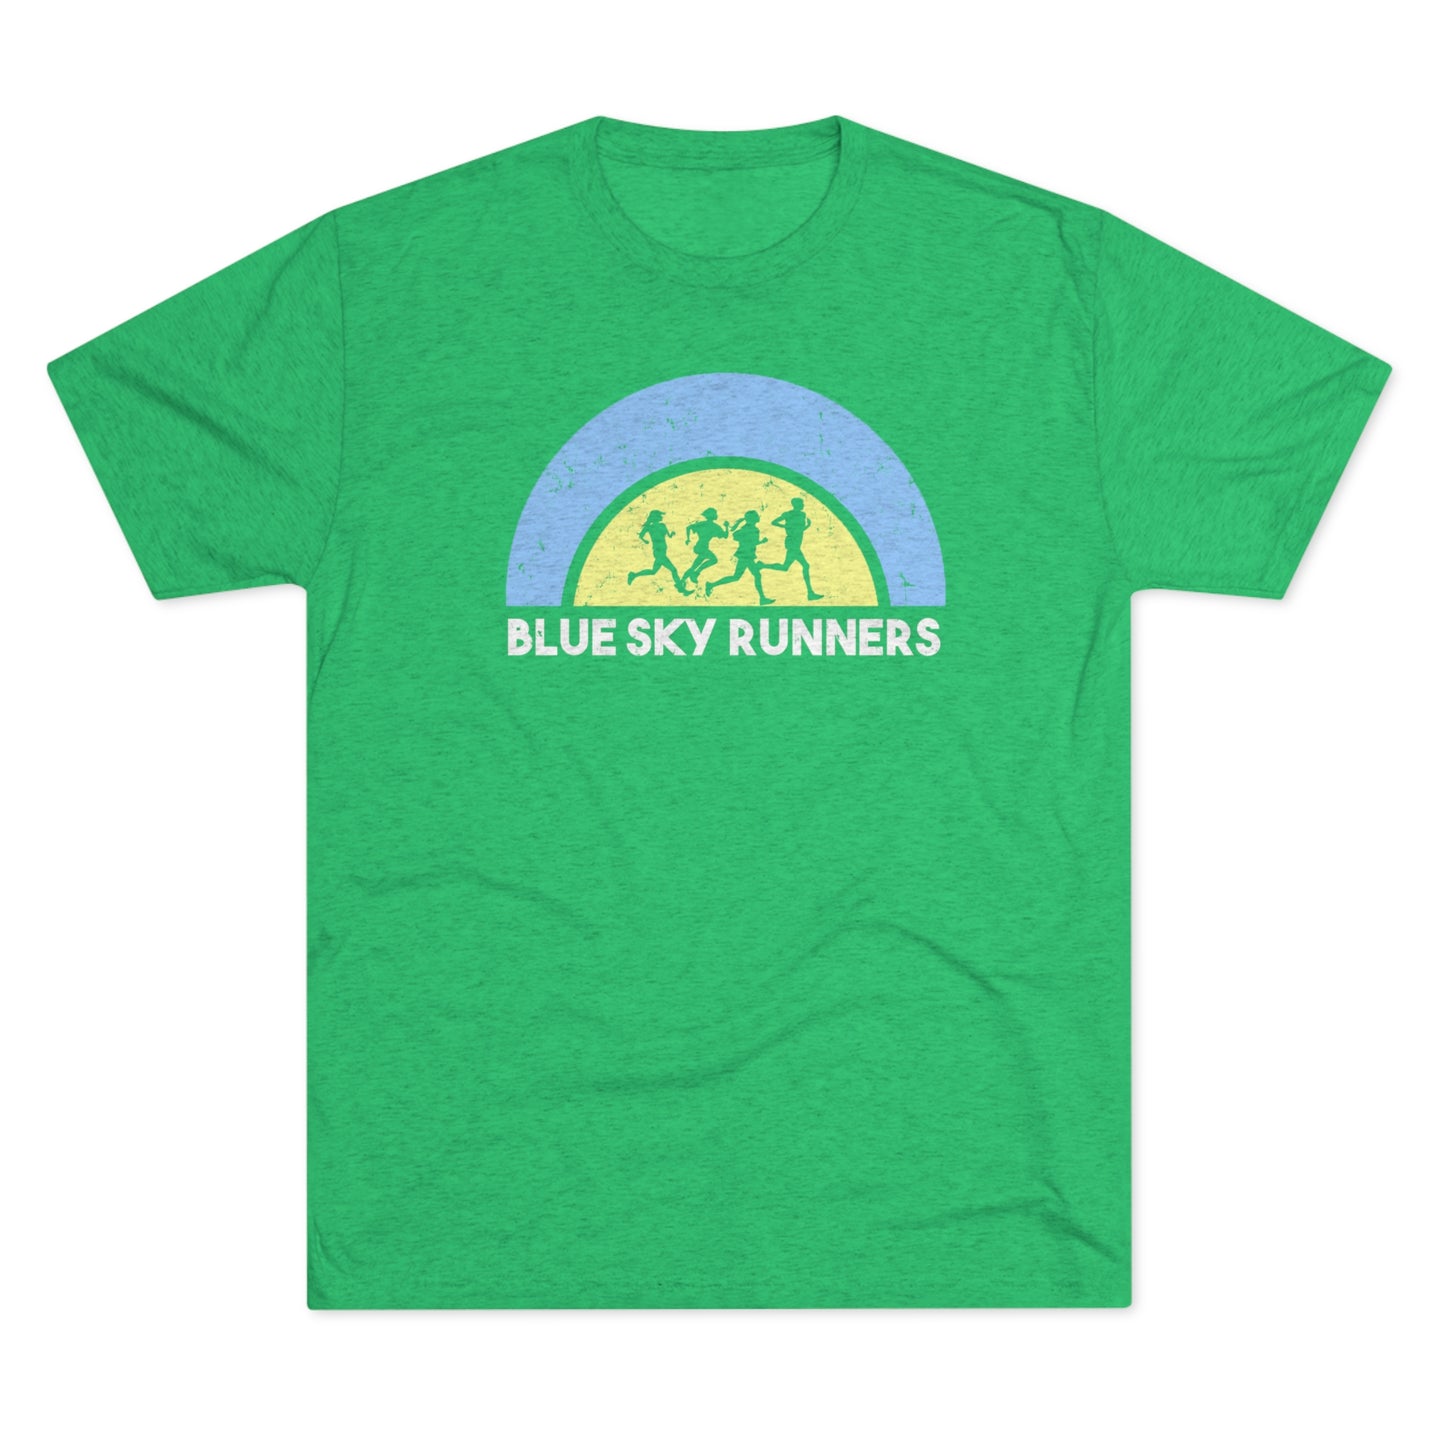 A high-quality regular fit tee featuring a retro-style design of three figures running under a semi-circle blue and yellow arch. Made from soft tri-blend fabric, the text "BLUE SKY RUNNERS" appears below the figures, making it the perfect Printify Blue Sky Unisex Tri-Blend Crew Tee.